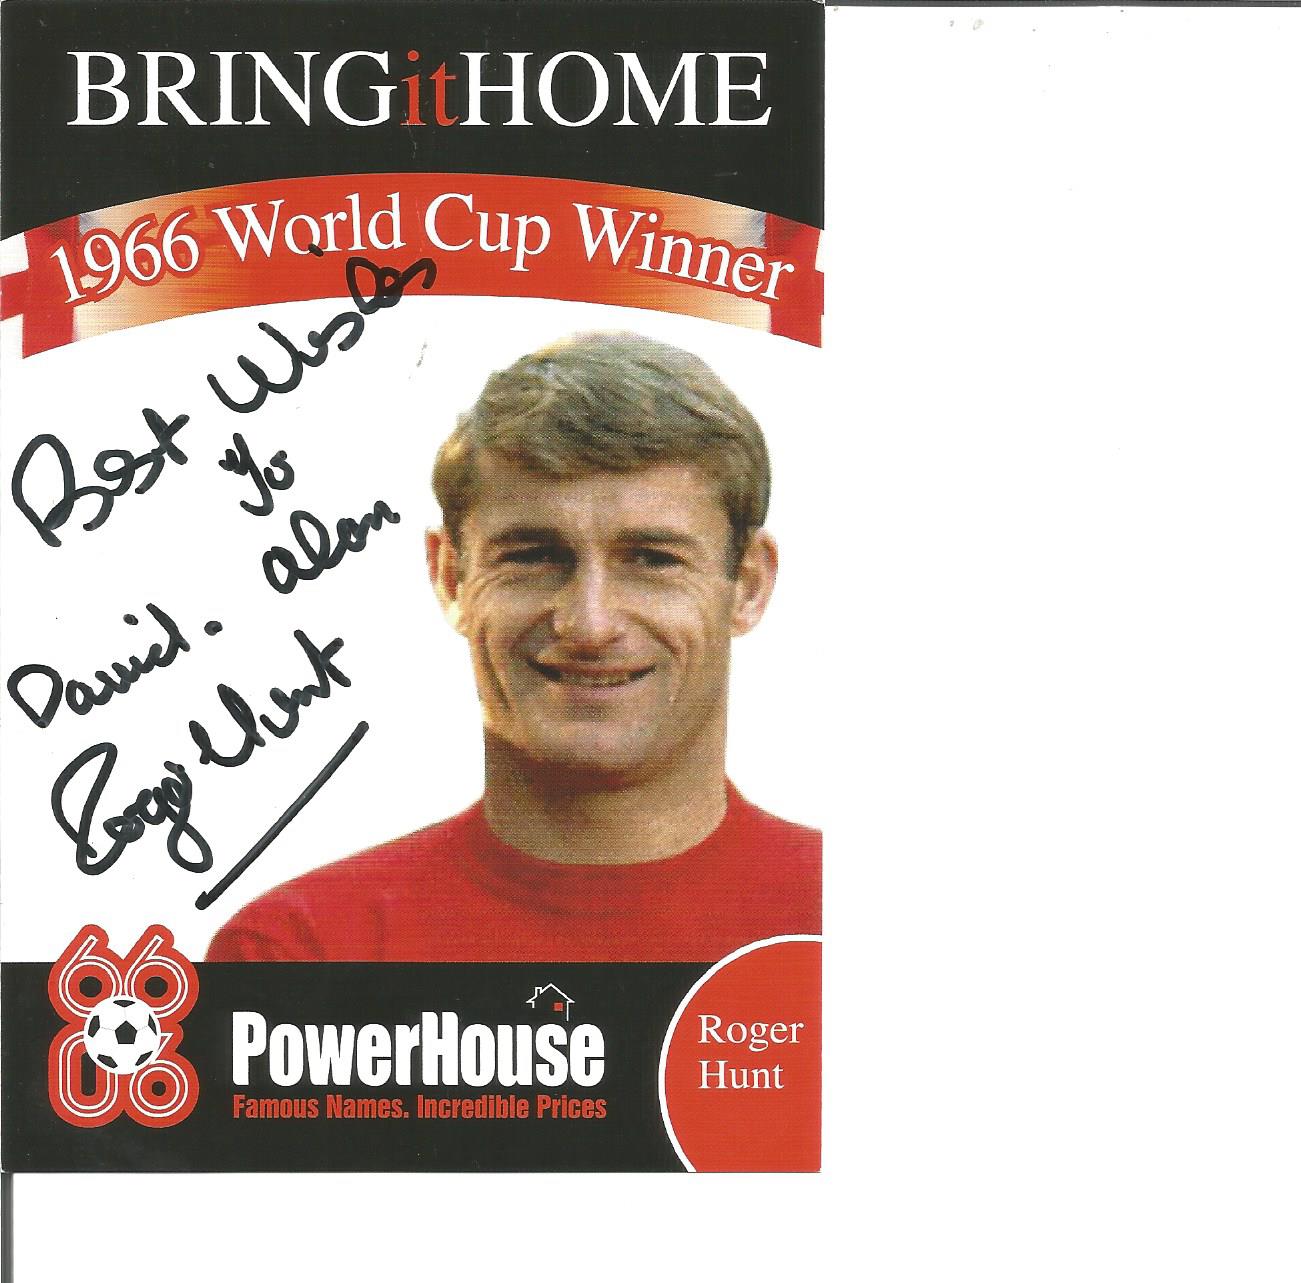 Roger Hunt signed 6x4 Powerhouse promotional photo card. Good Condition. All signed pieces come with